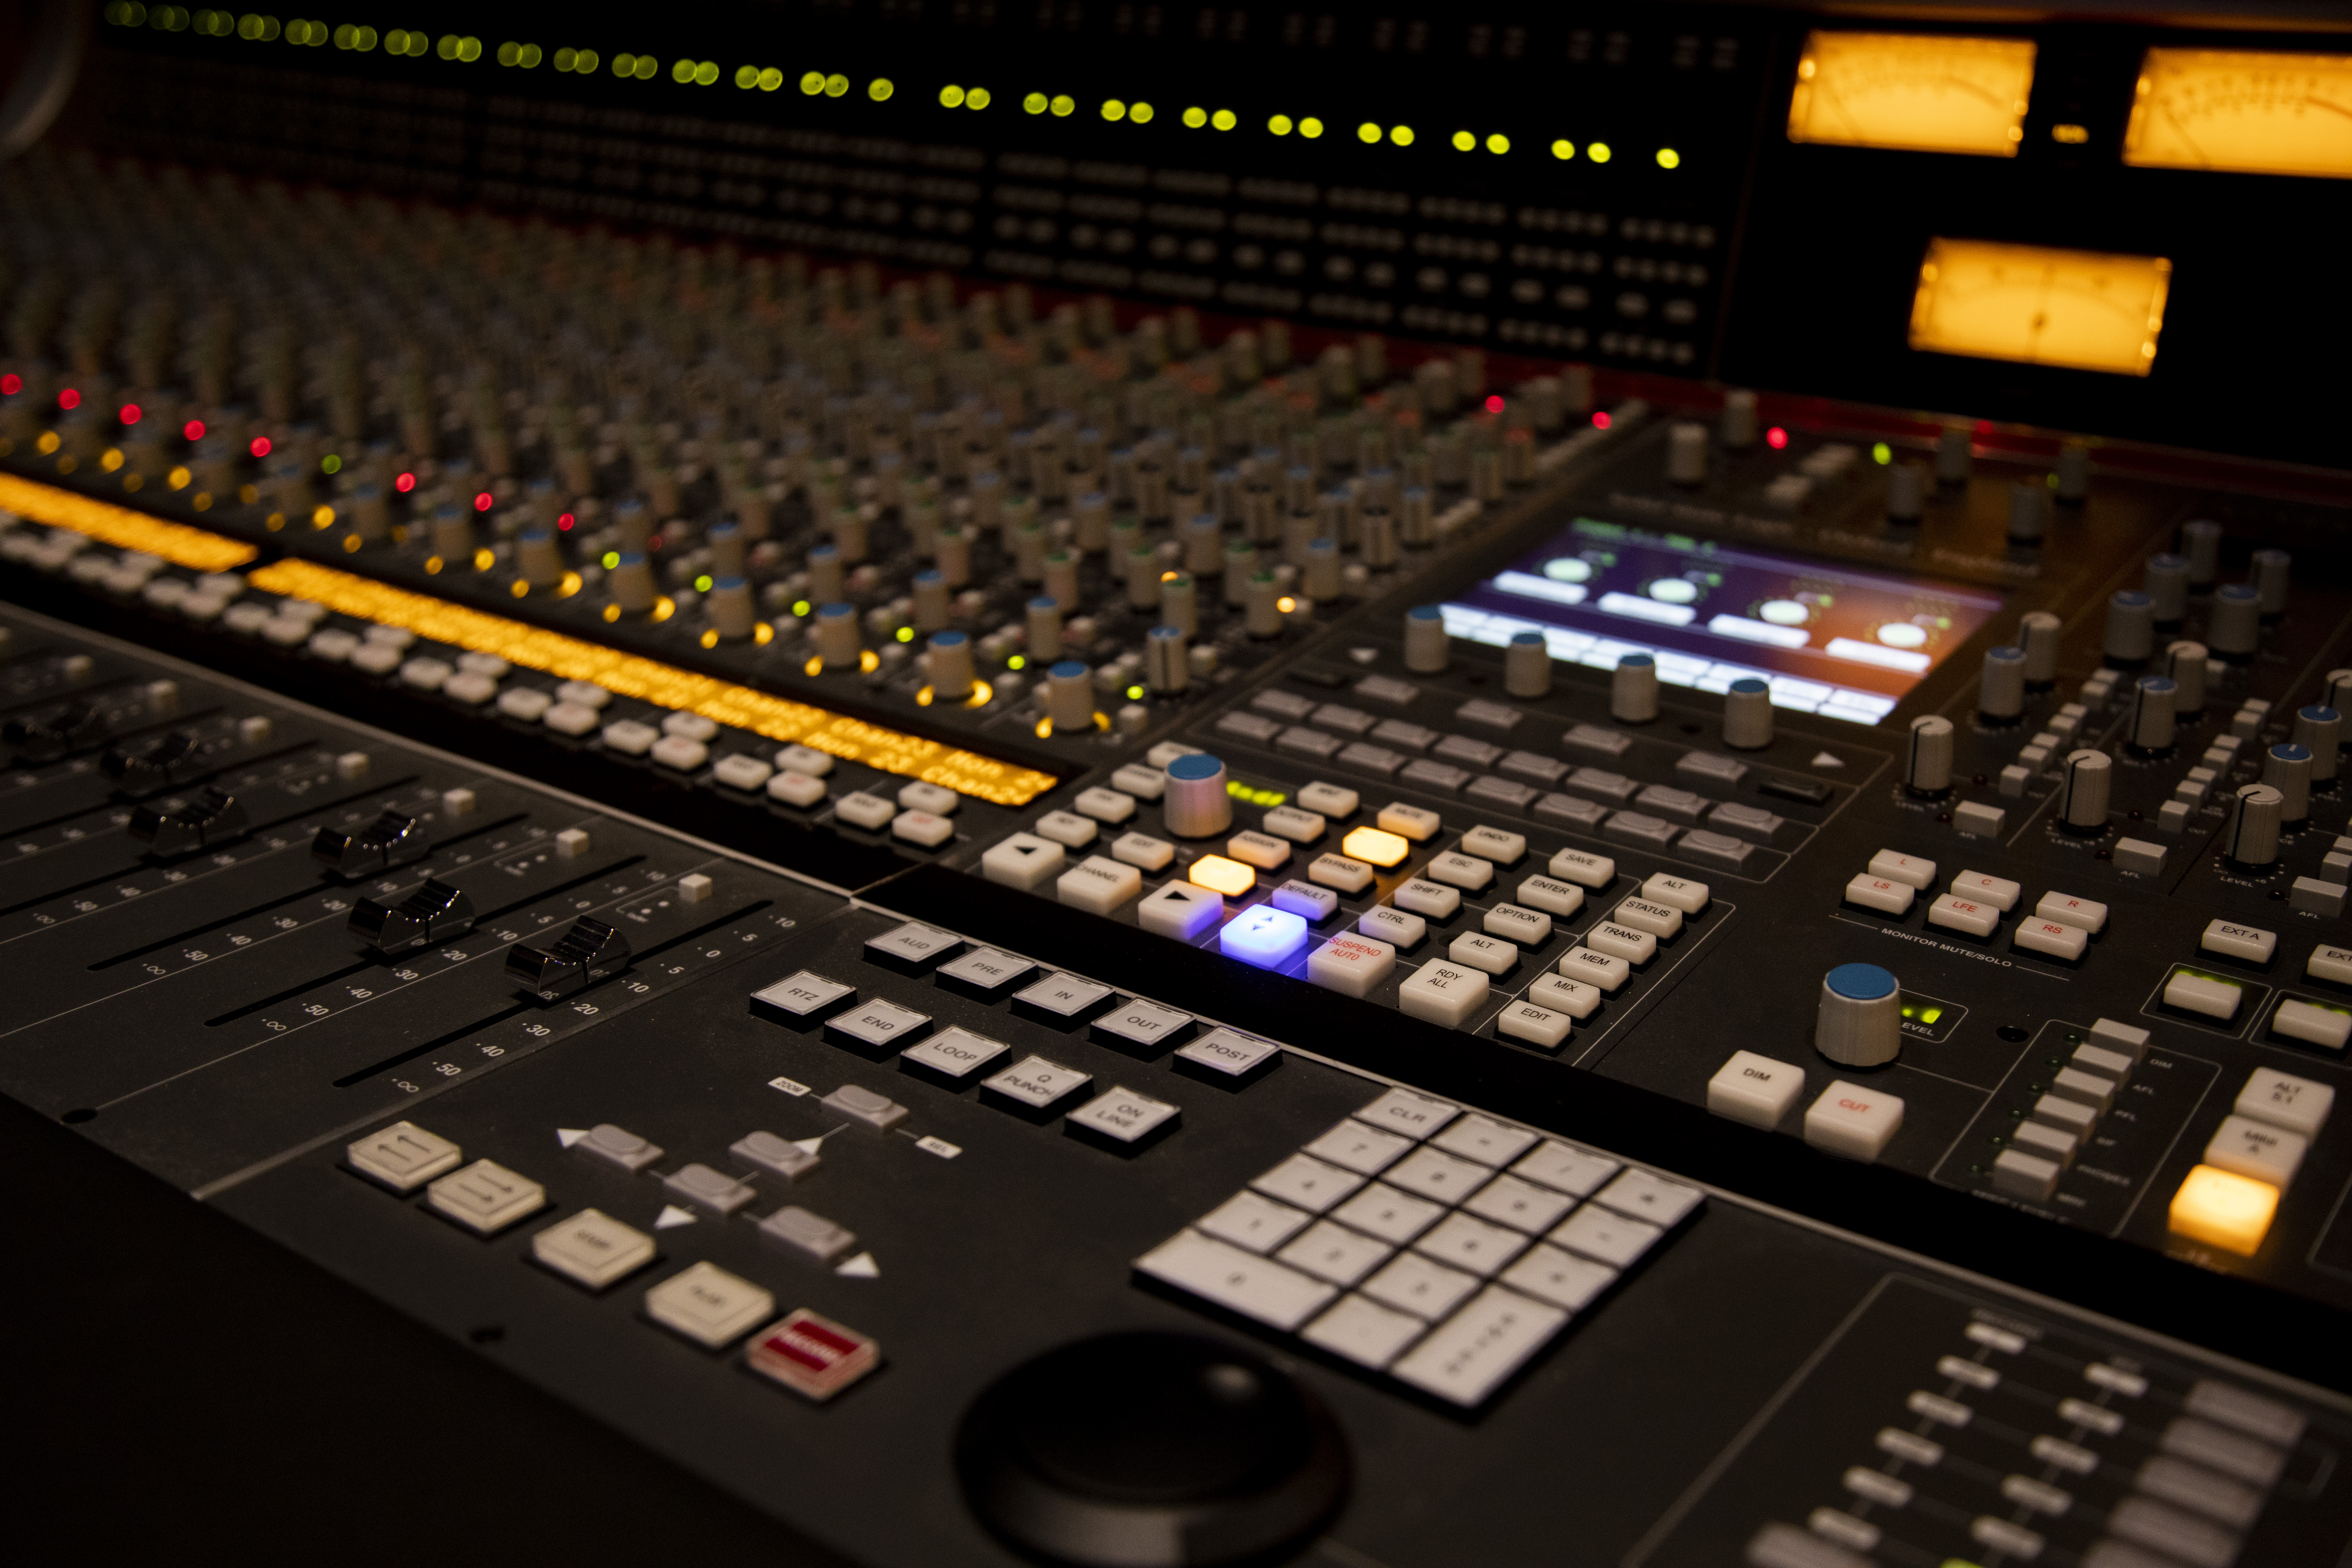 A large music mixing desk with buttons and screens